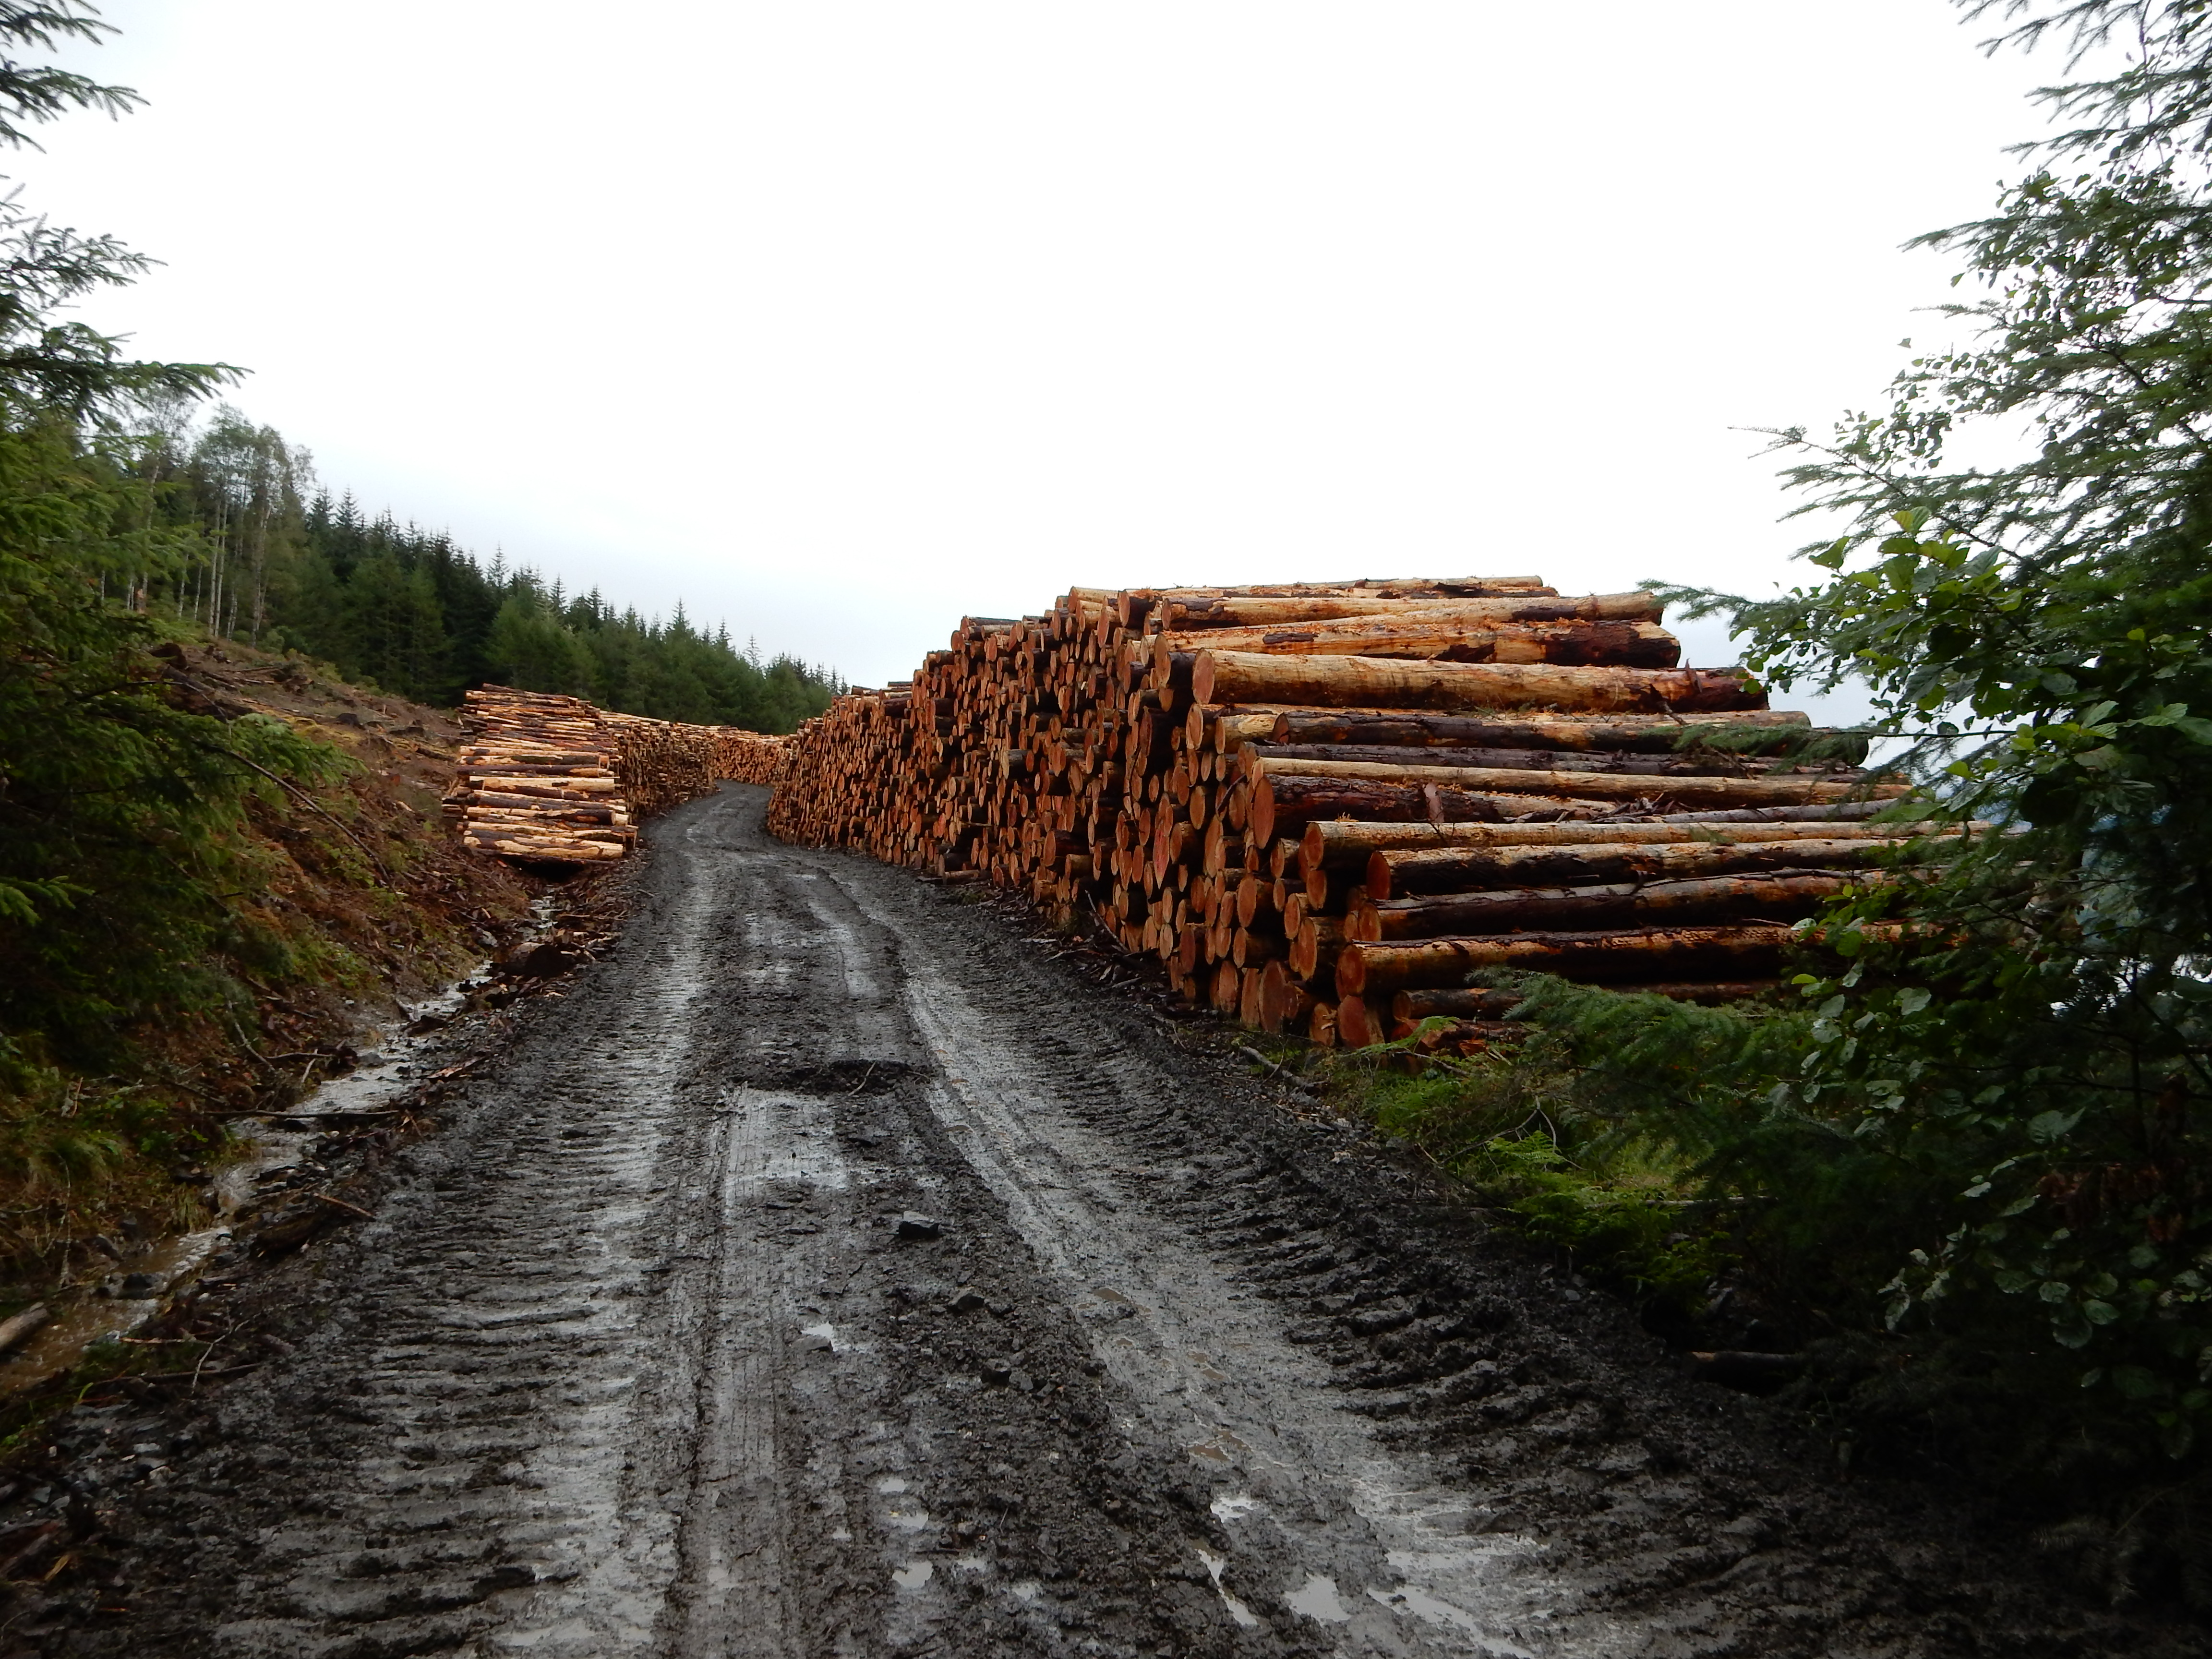 Stacked timber logs beside a forest road